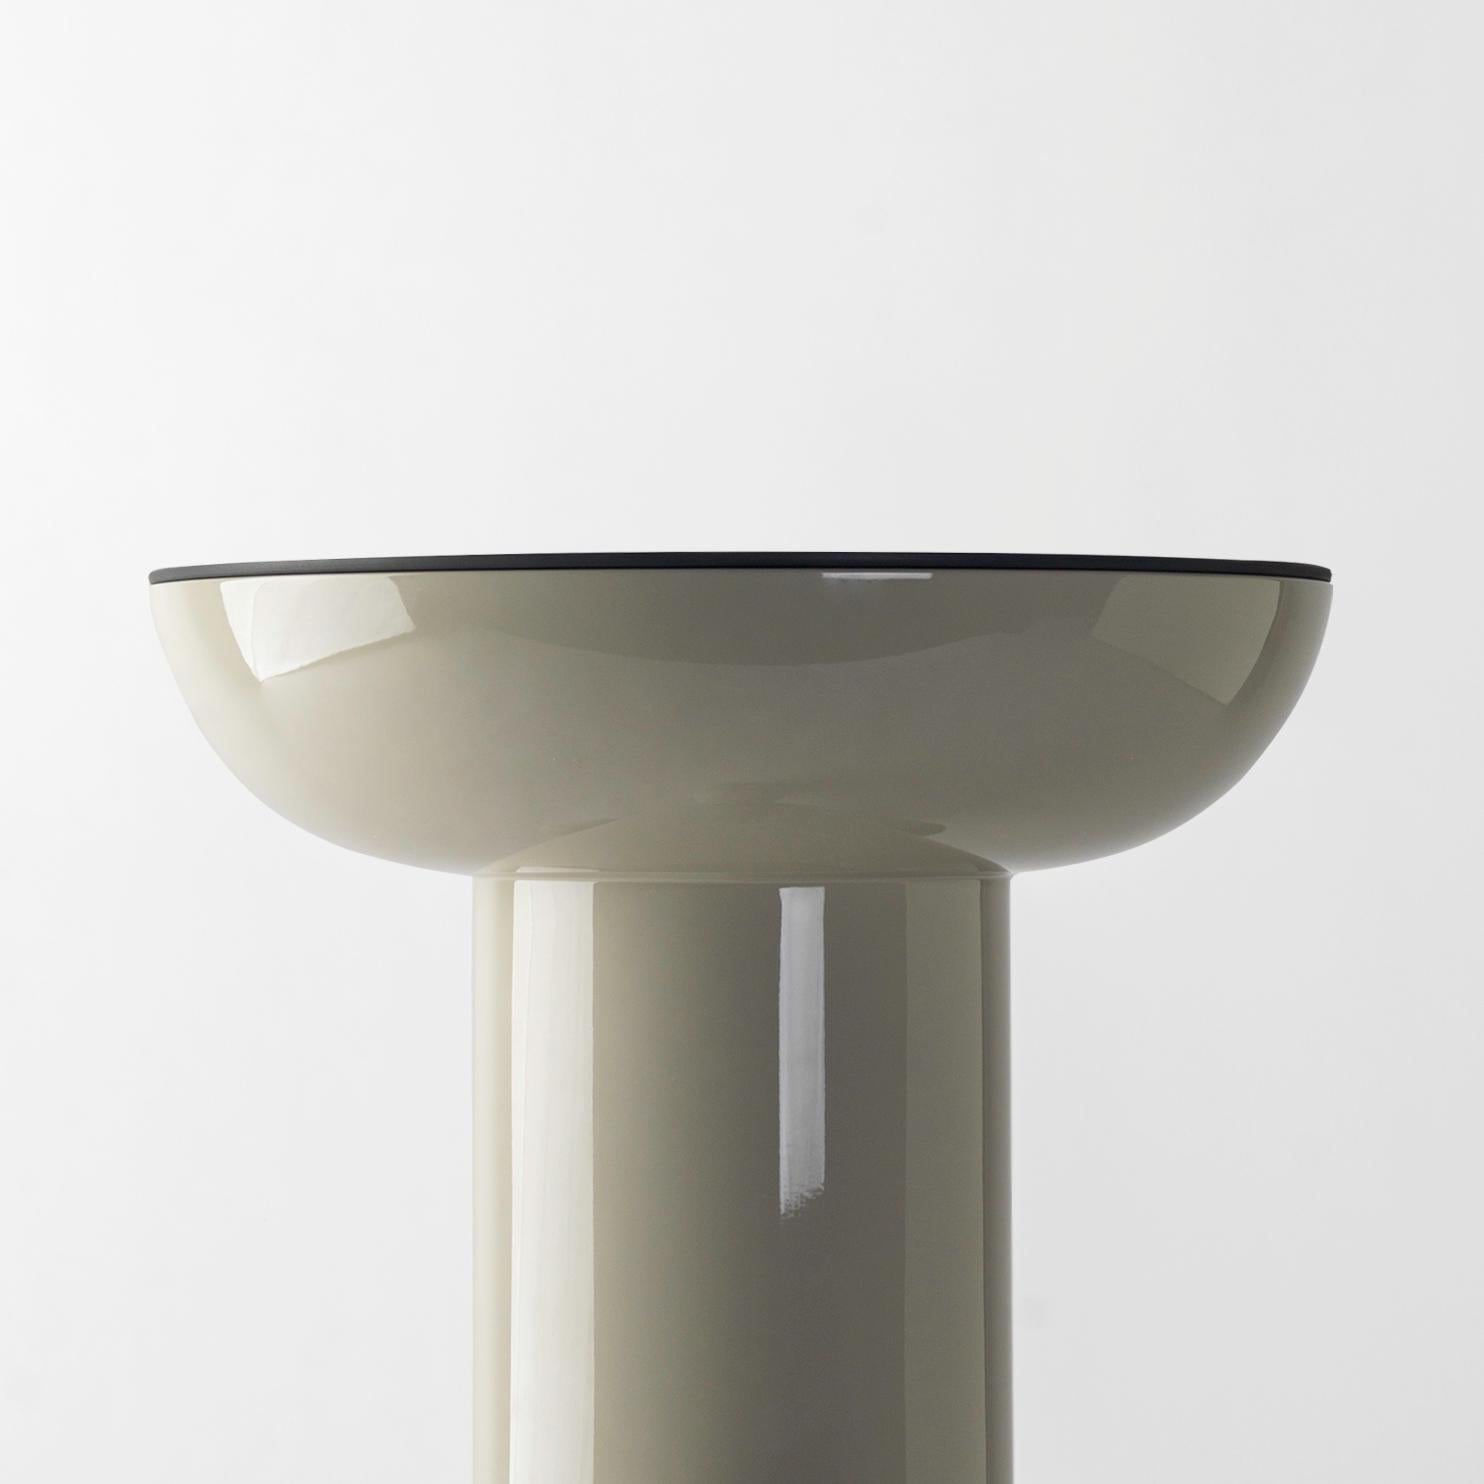 Light grey explorer #03 table

Design by Jaime Hayon, 2019
Manufactured by BD Barcelona.

Lacquered fibreglass body. Solid turned wooden legs and lacquered. Painted glass table top.

Measure: 40 Ø x 50 cm

- Glass: RAL 7044
- Body: RAL